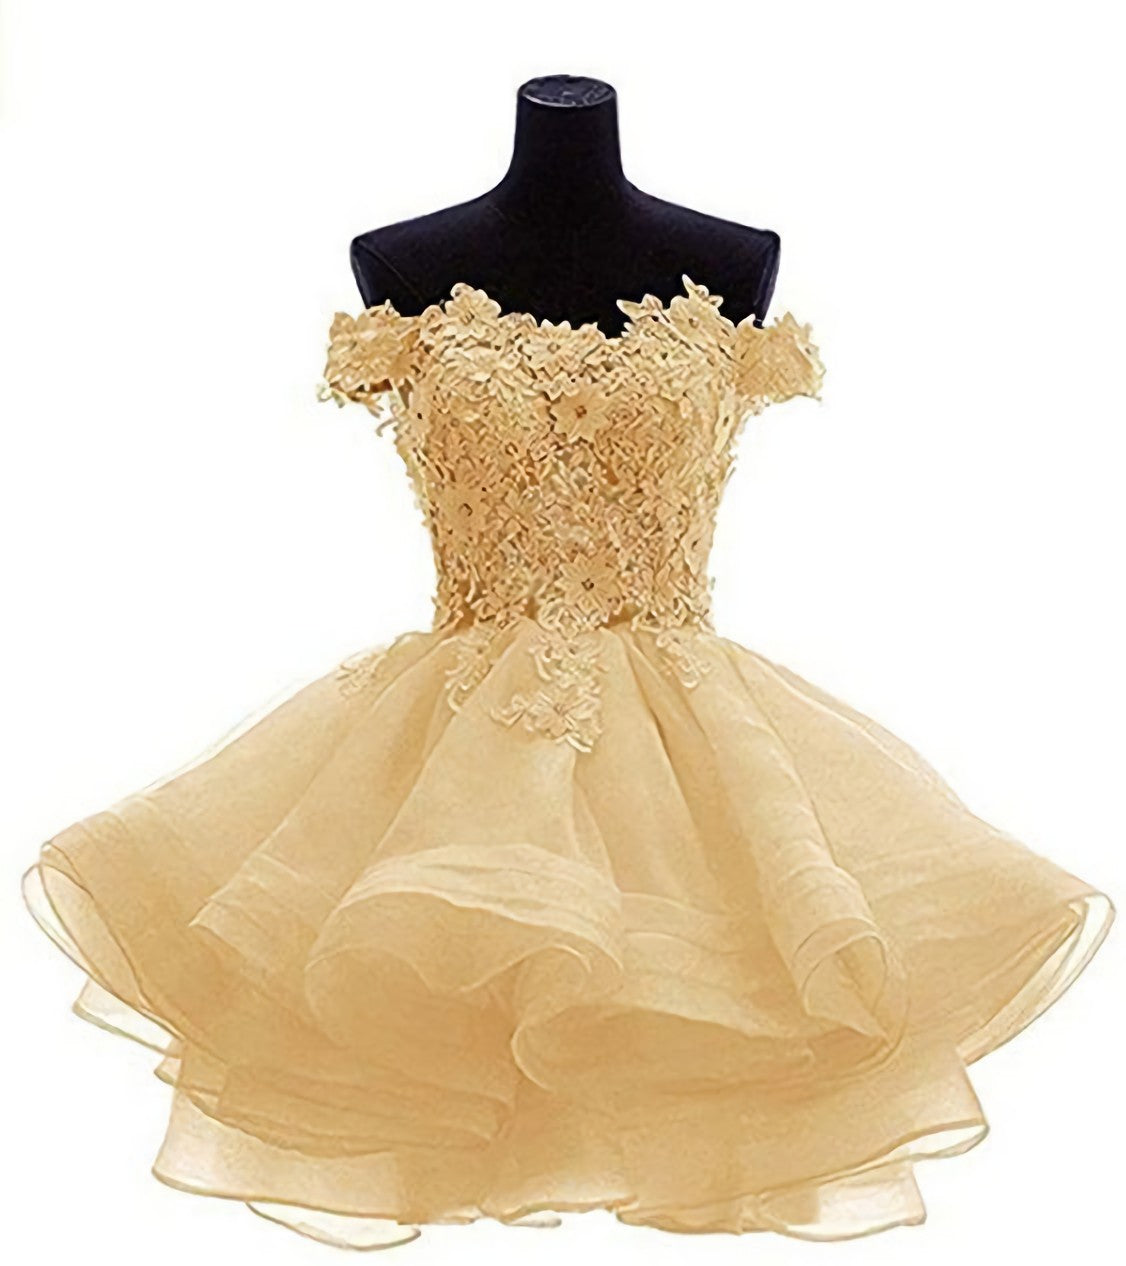 Elegant Yellow Appliques Tulle Dress, Ruffles Off Shoulder Short Corset Homecoming Dress outfit, Prom Dress Princess Style